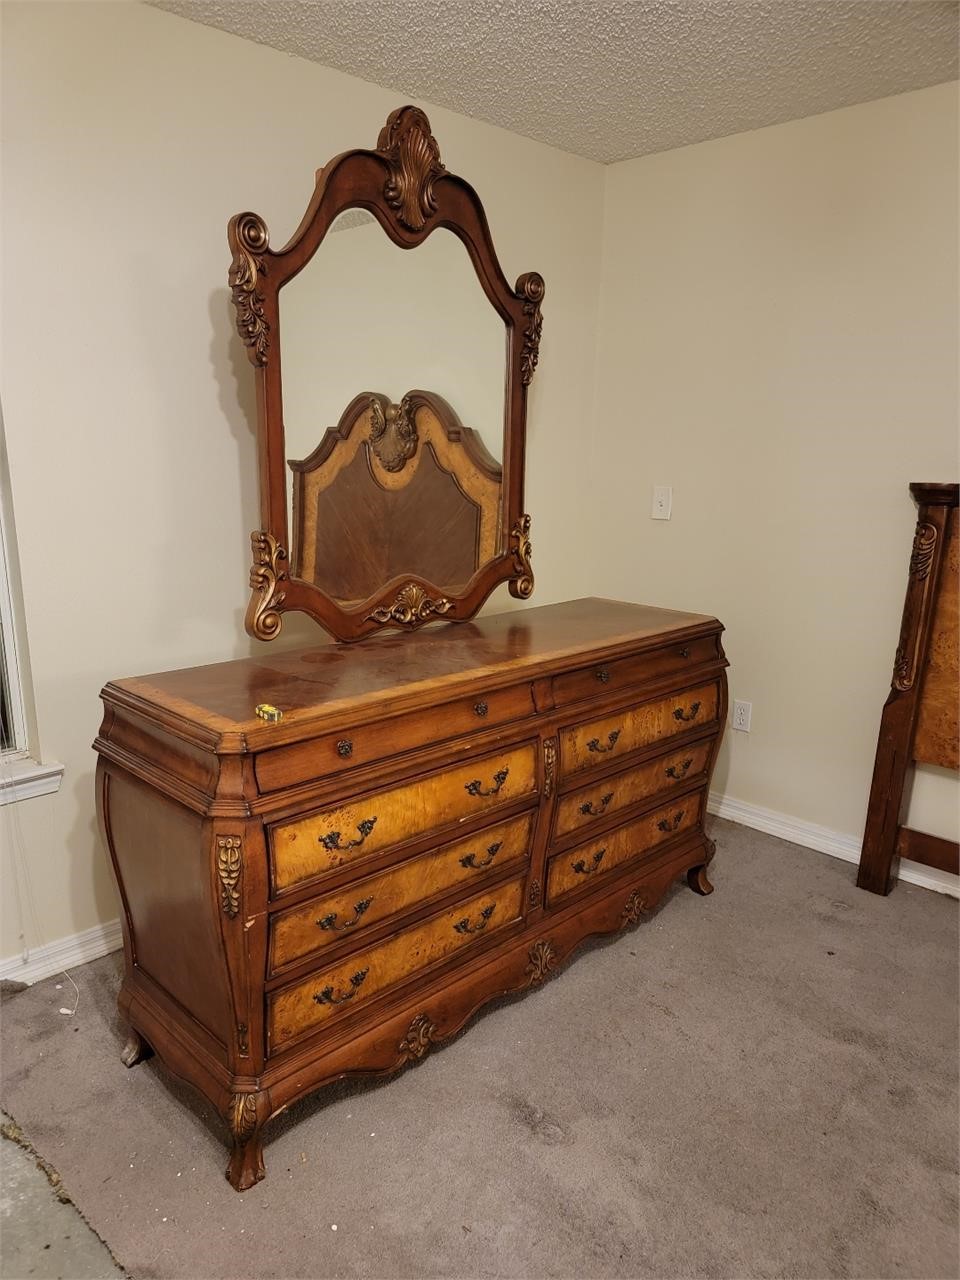 Mahoghany & Walnut  - Exquisite French Carved Bedroom Set